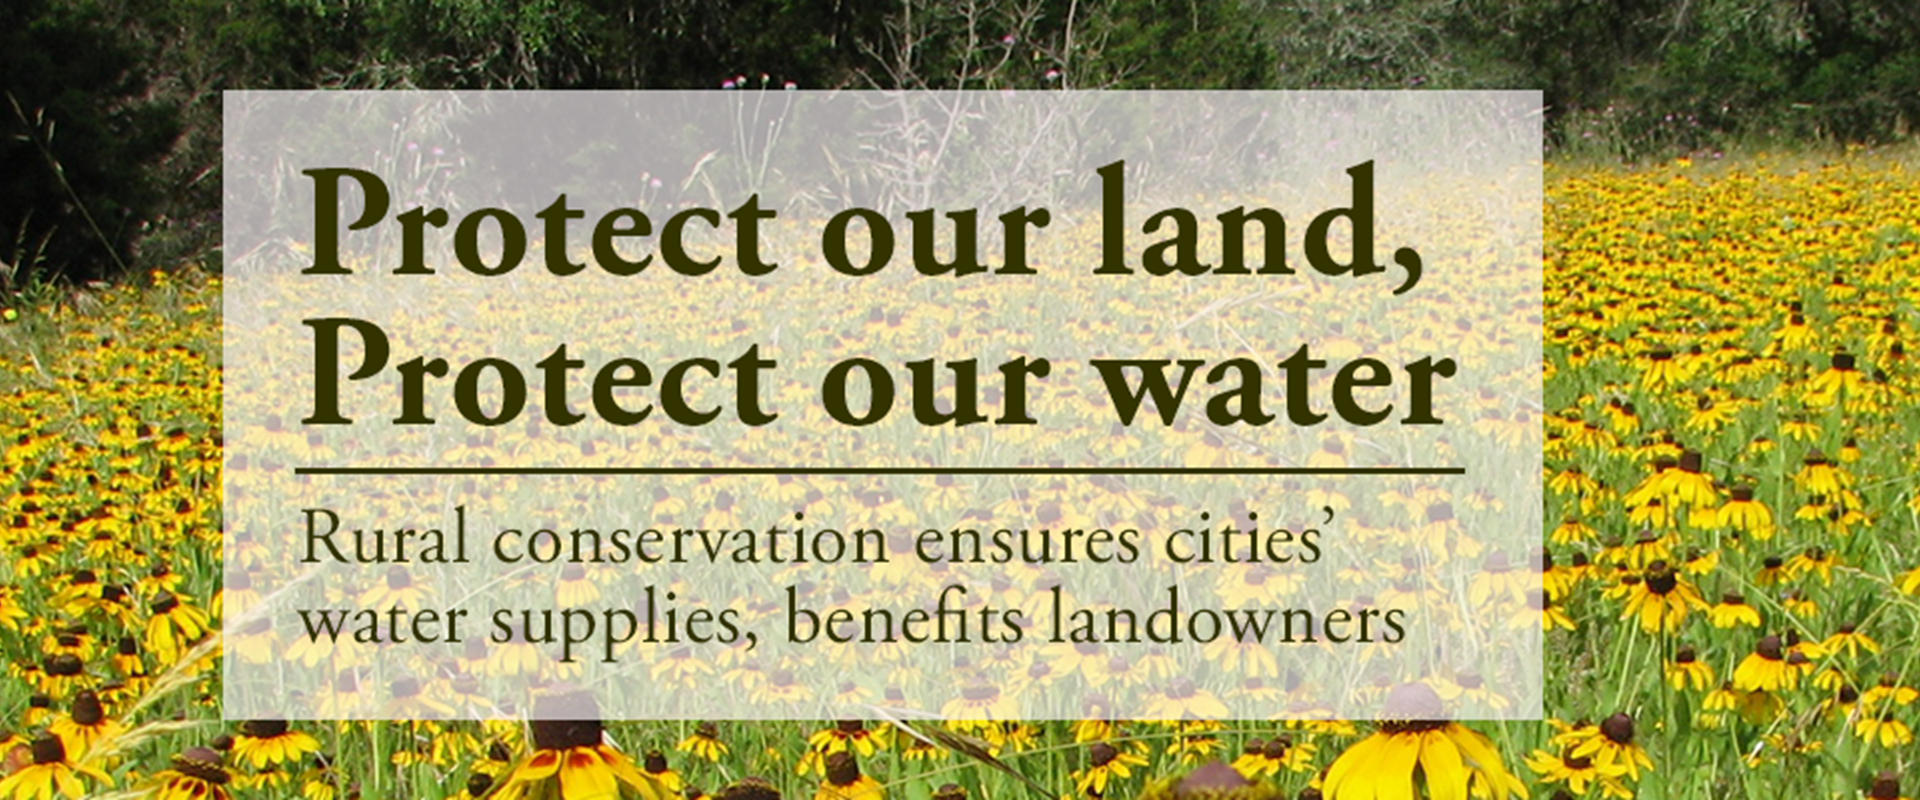 Protect our land, protect our water